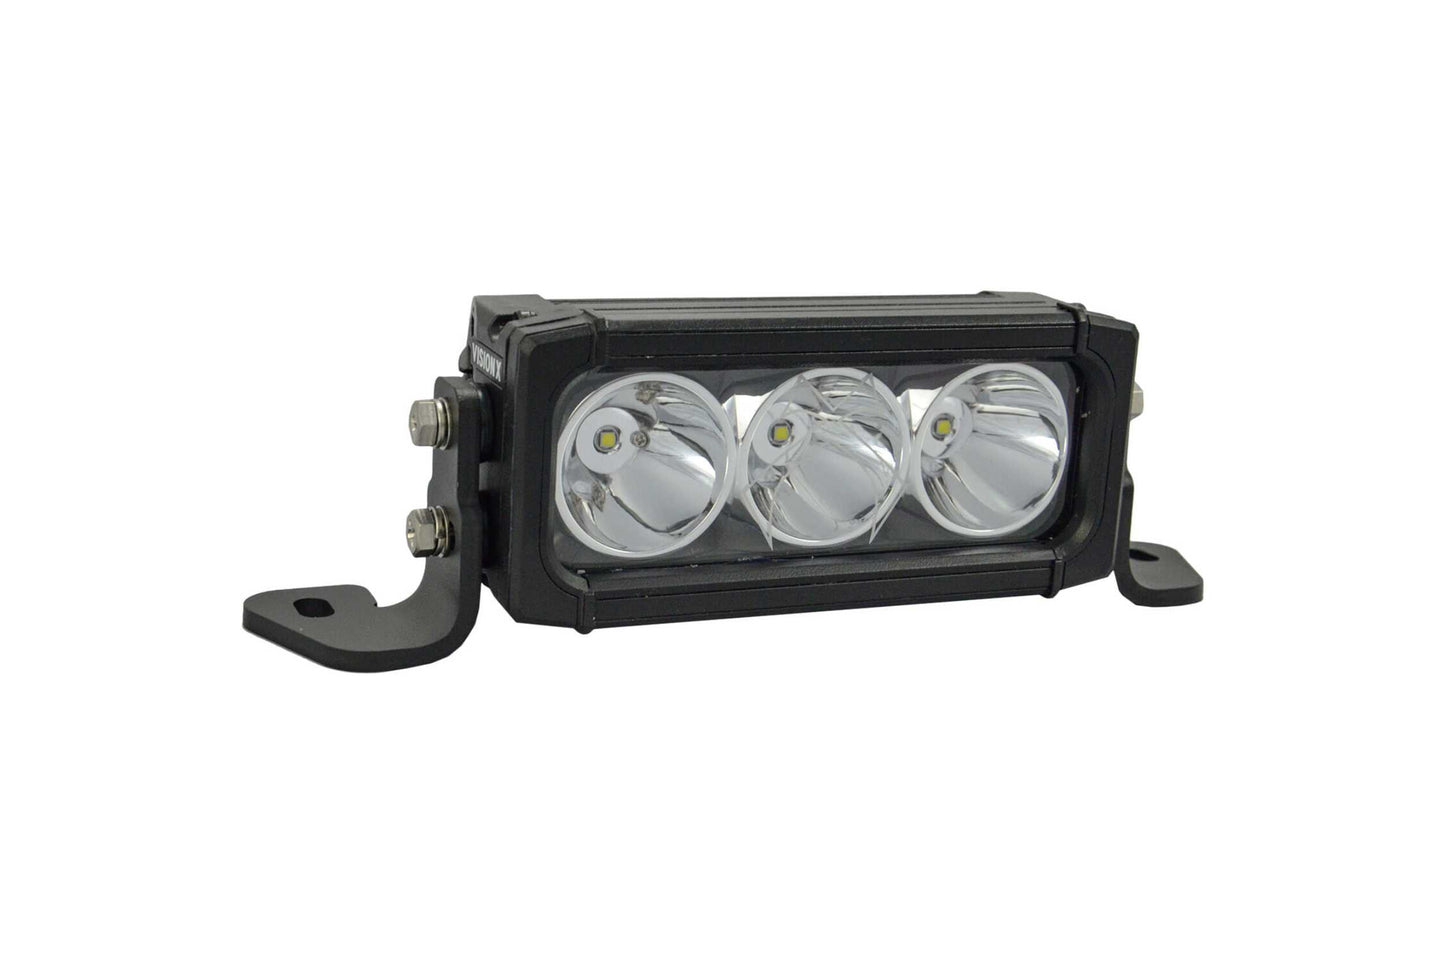 Vision X Light Bar: 11in (6-LED / XPR-S / Xtreme Distance Spot Beam)